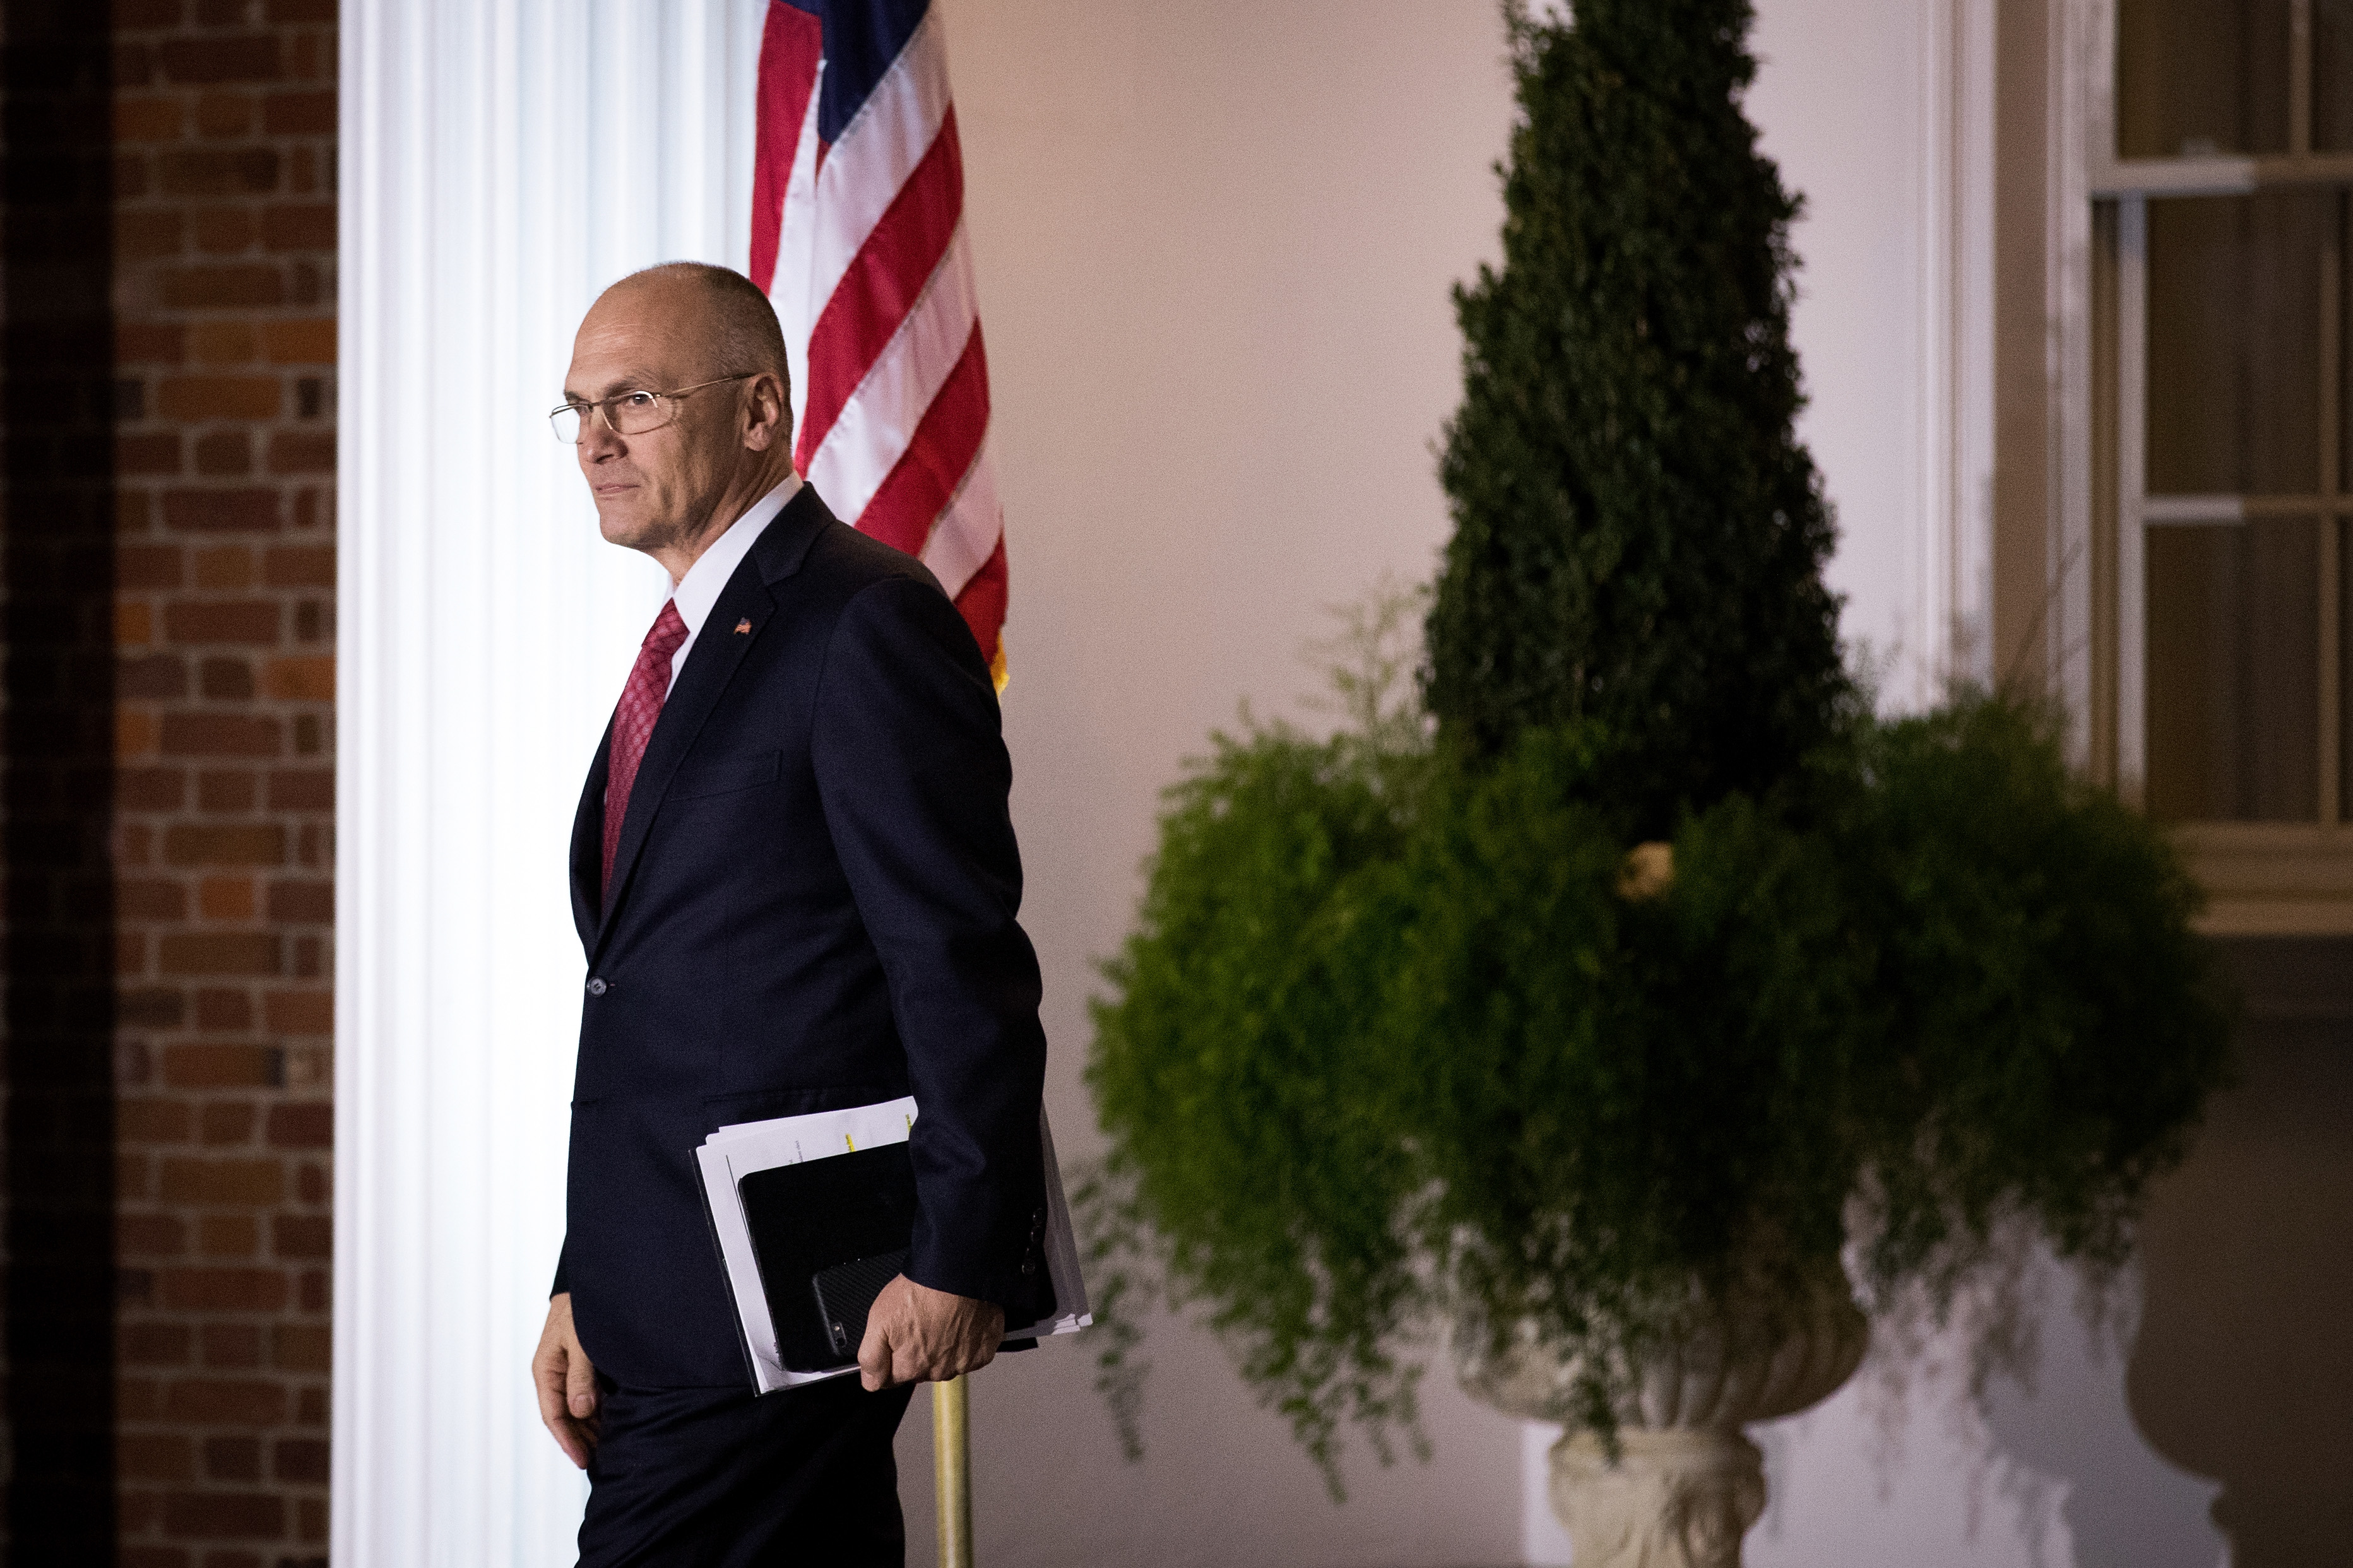 Andrew Puzder, chief executive of CKE Restaurants, exits after his meeting with president-elect Donald Trump at Trump International Golf Club, November 19, 2016 in Bedminster Township, New Jersey. (Photo by Drew Angerer--Getty Images) (Drew Angerer&mdash;Getty Images)